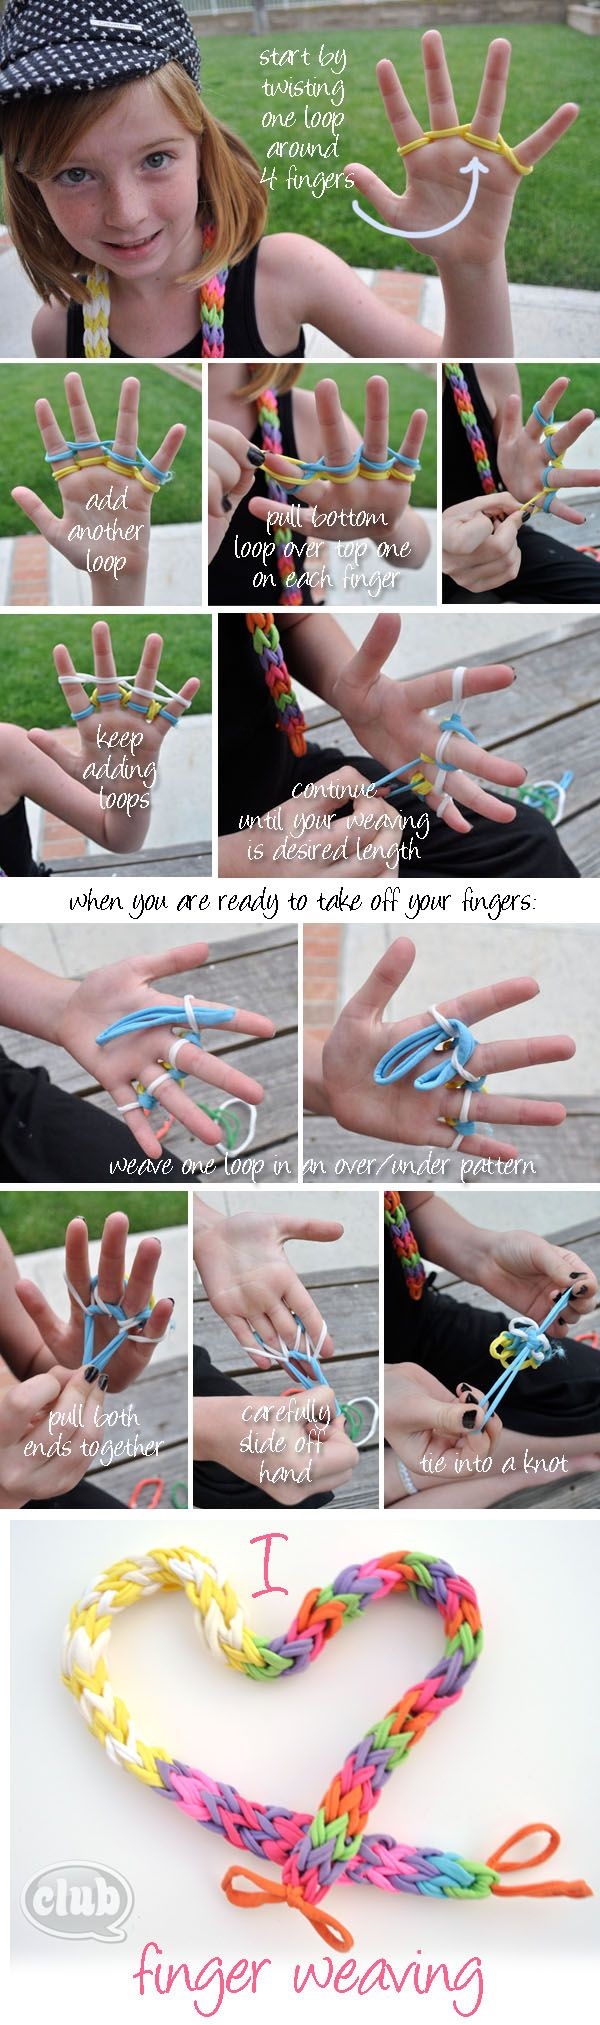 Addictive weaving Tutorials to try this summer (30)